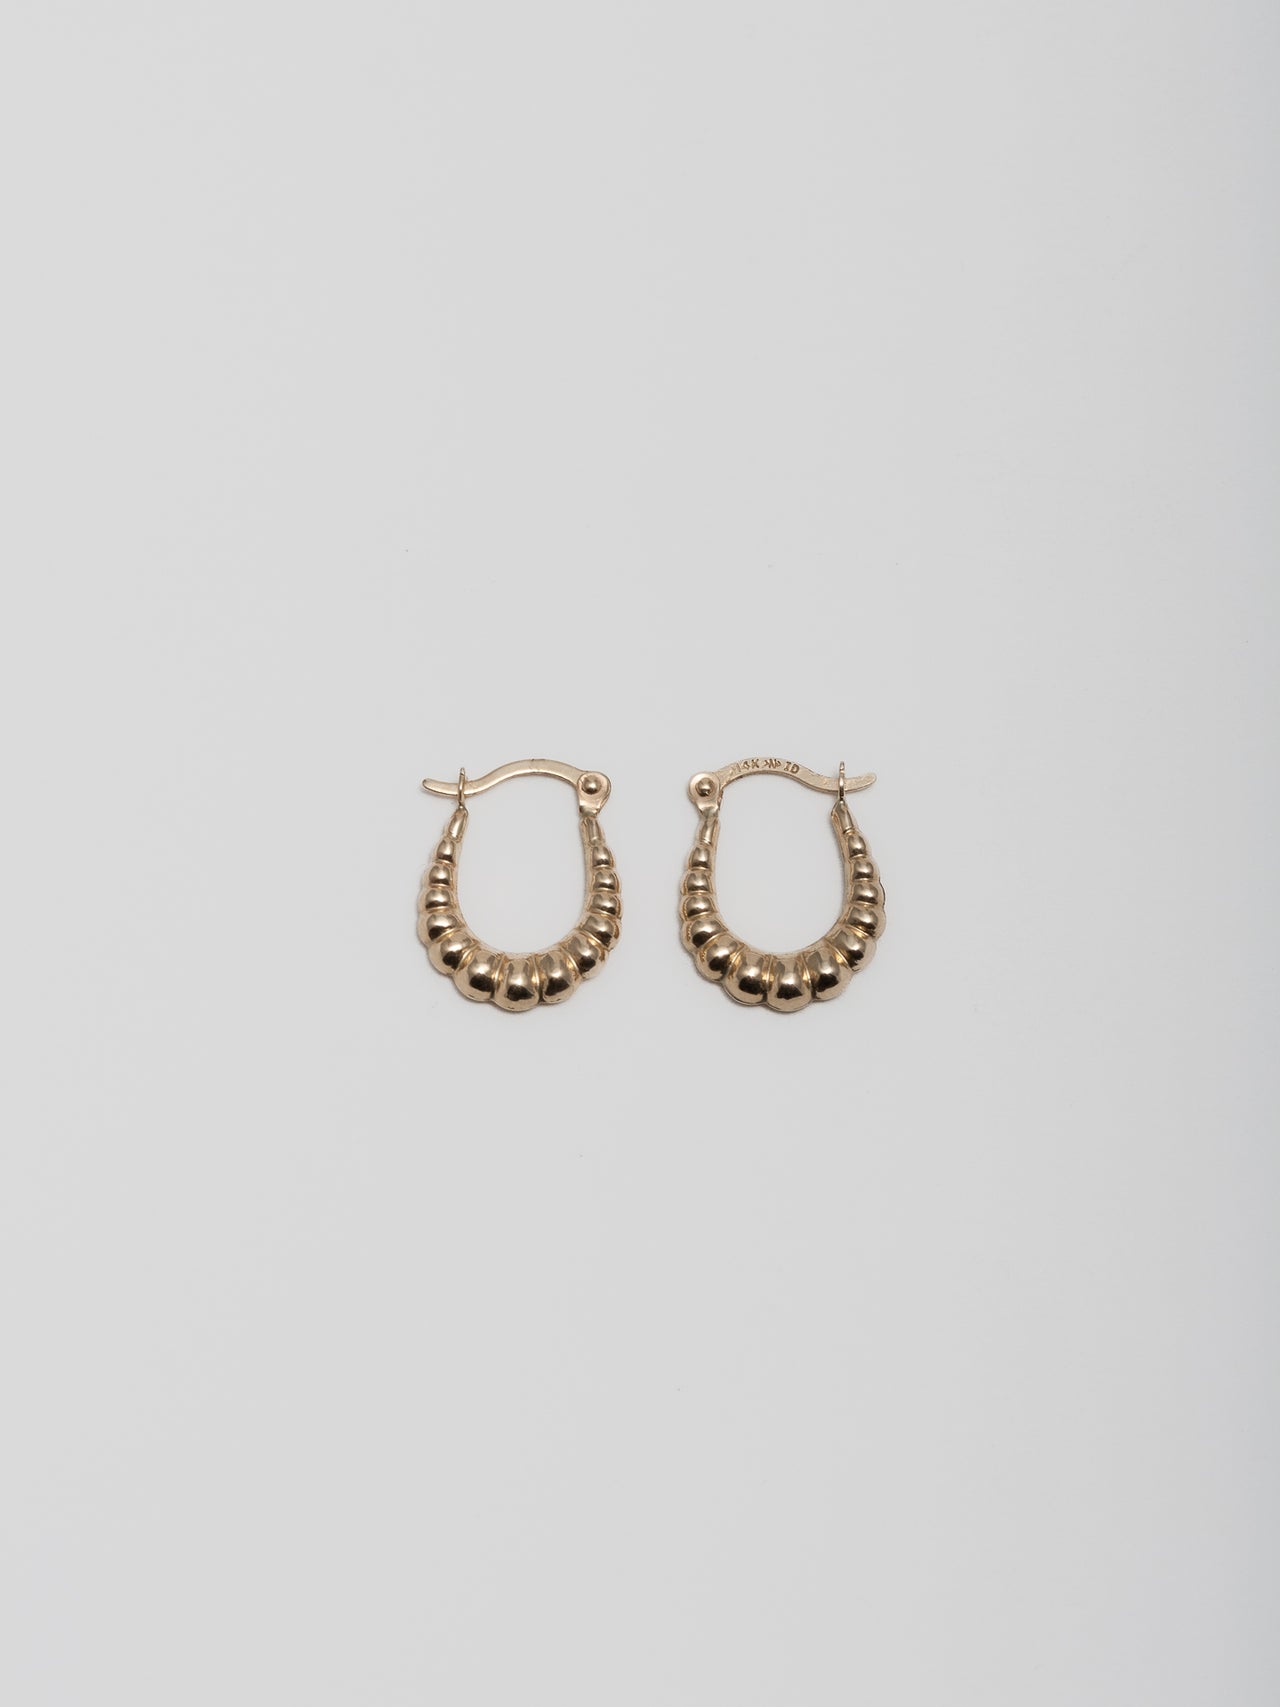 product image of yellow gold bolla hoops shot on white background